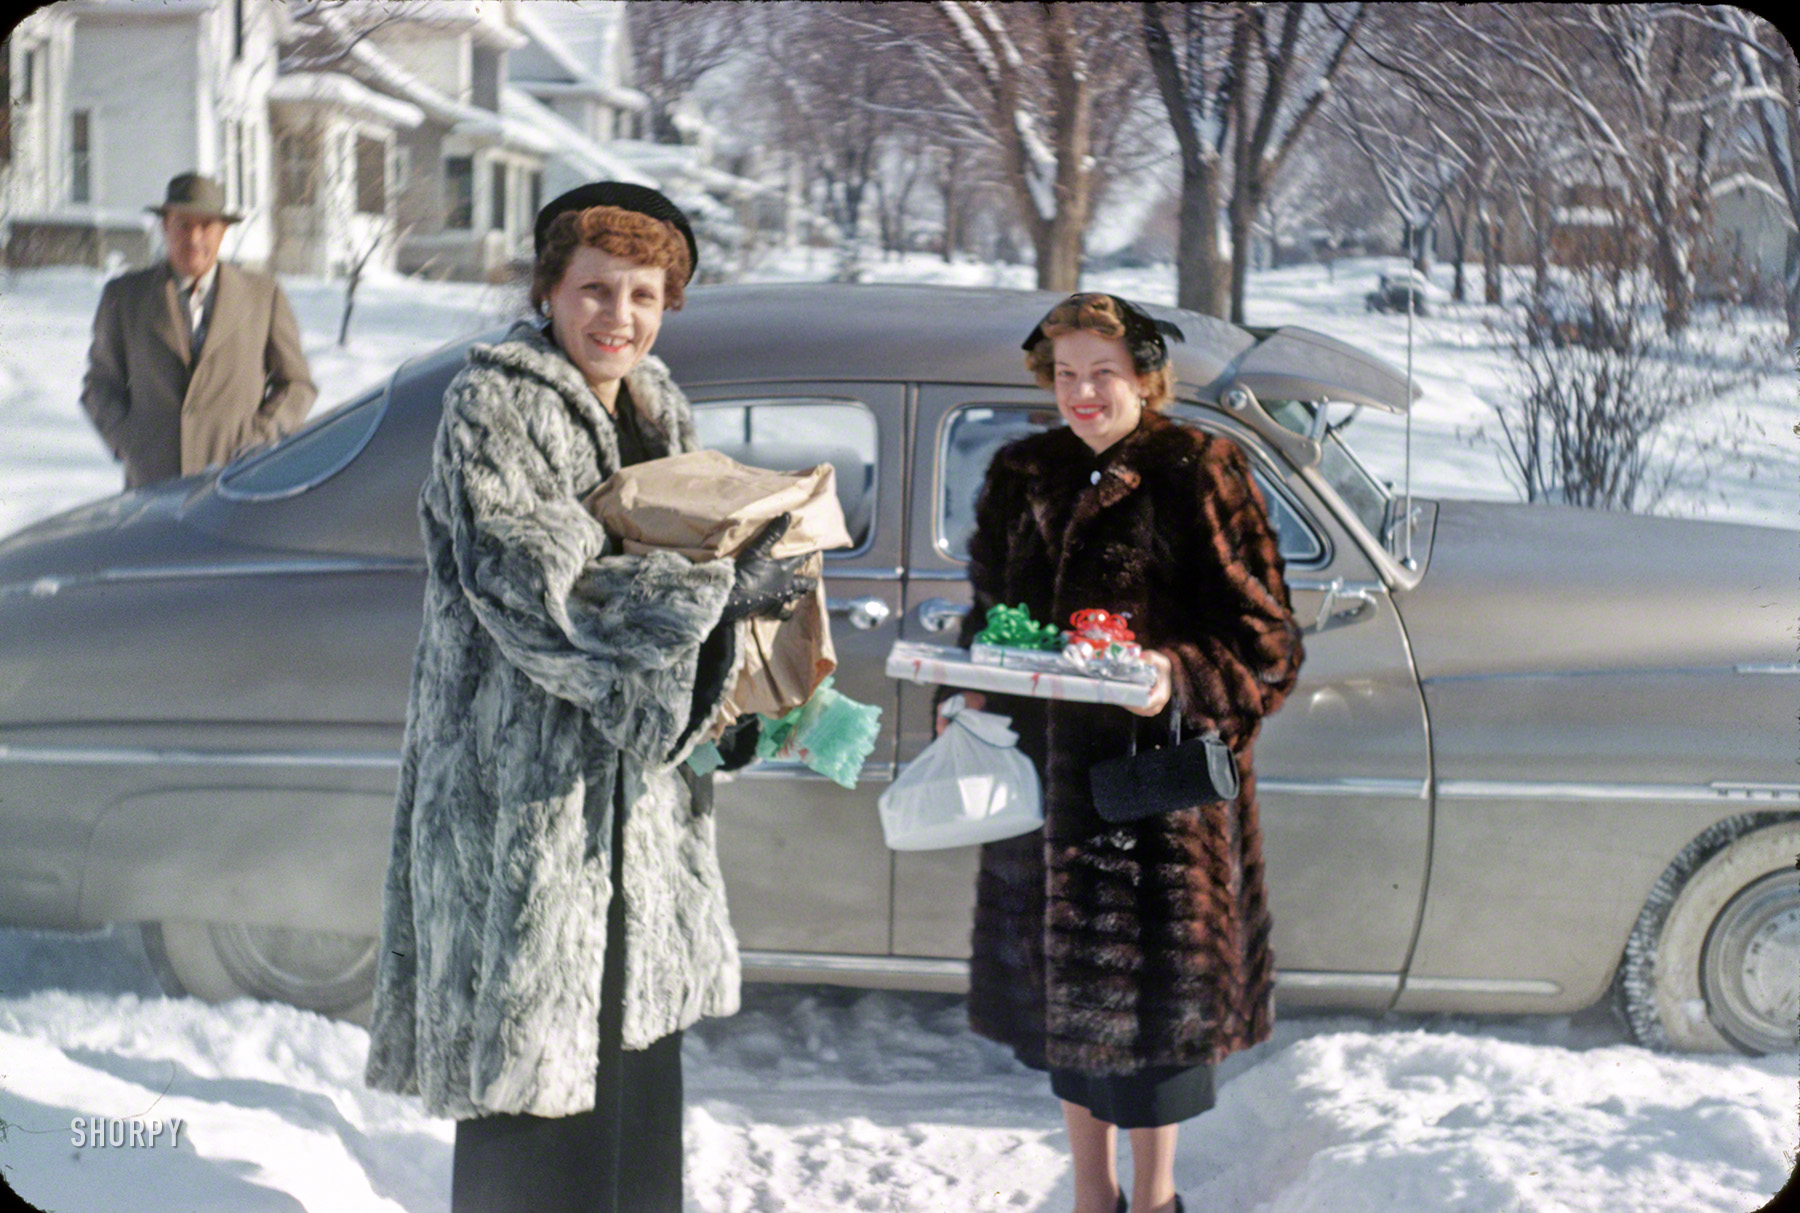 "Bill, Emily & E.S. - Dec 25 1951." It's beginning to look a lot like Christmas in this latest episode of Minnesota Kodachromes. Photo by Hubert Tuttle. Full size.